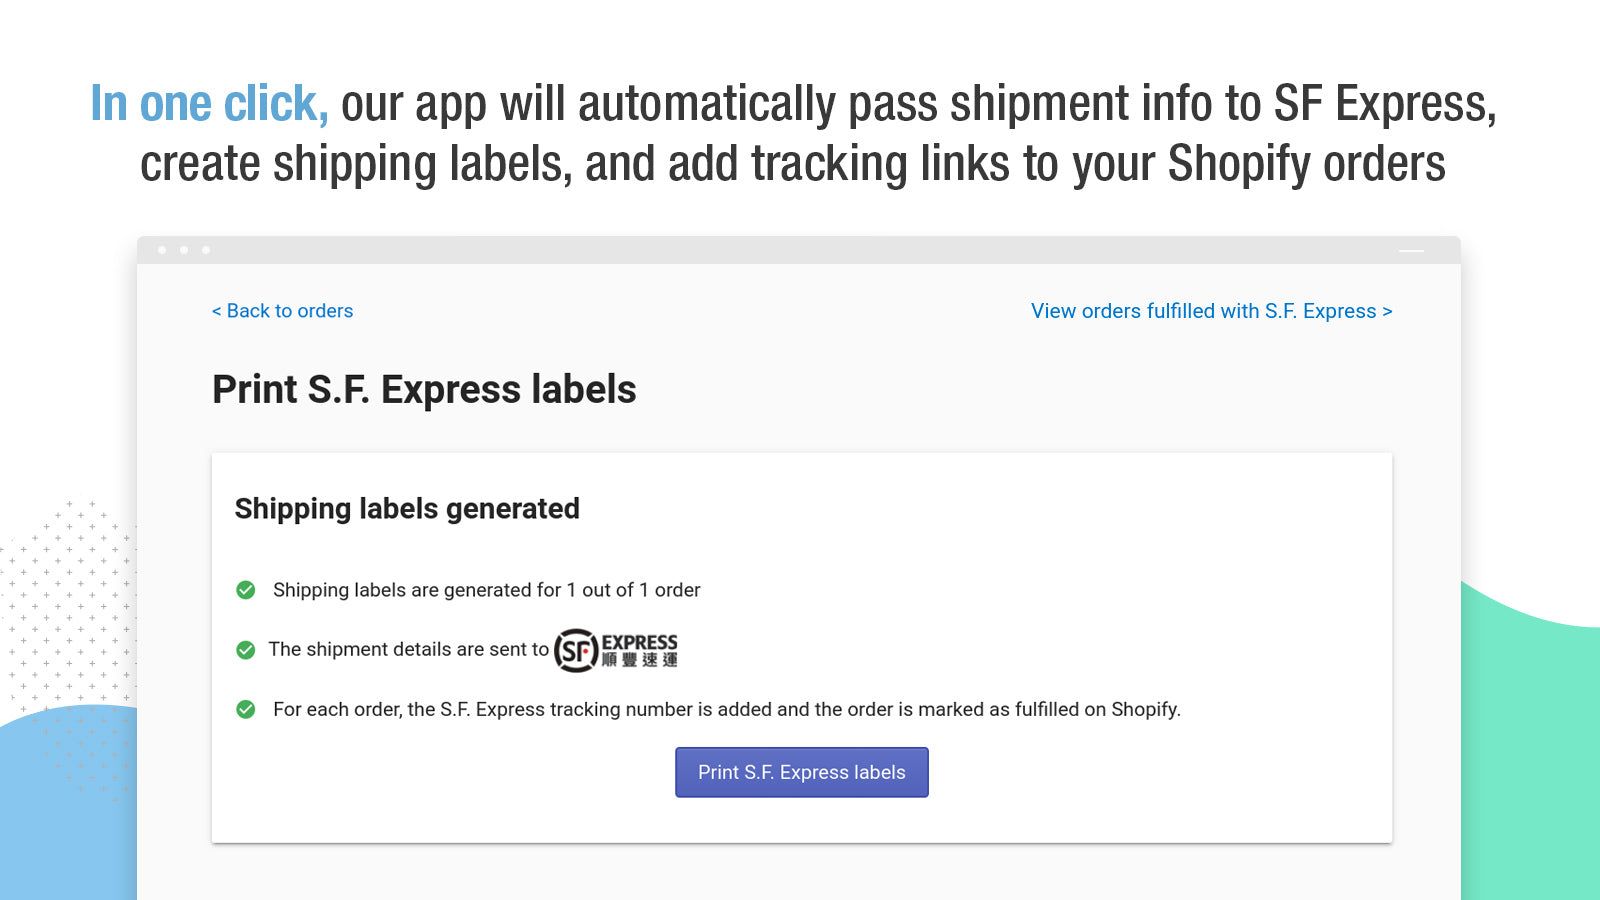 Create shipping labels and add tracking numbers in one click